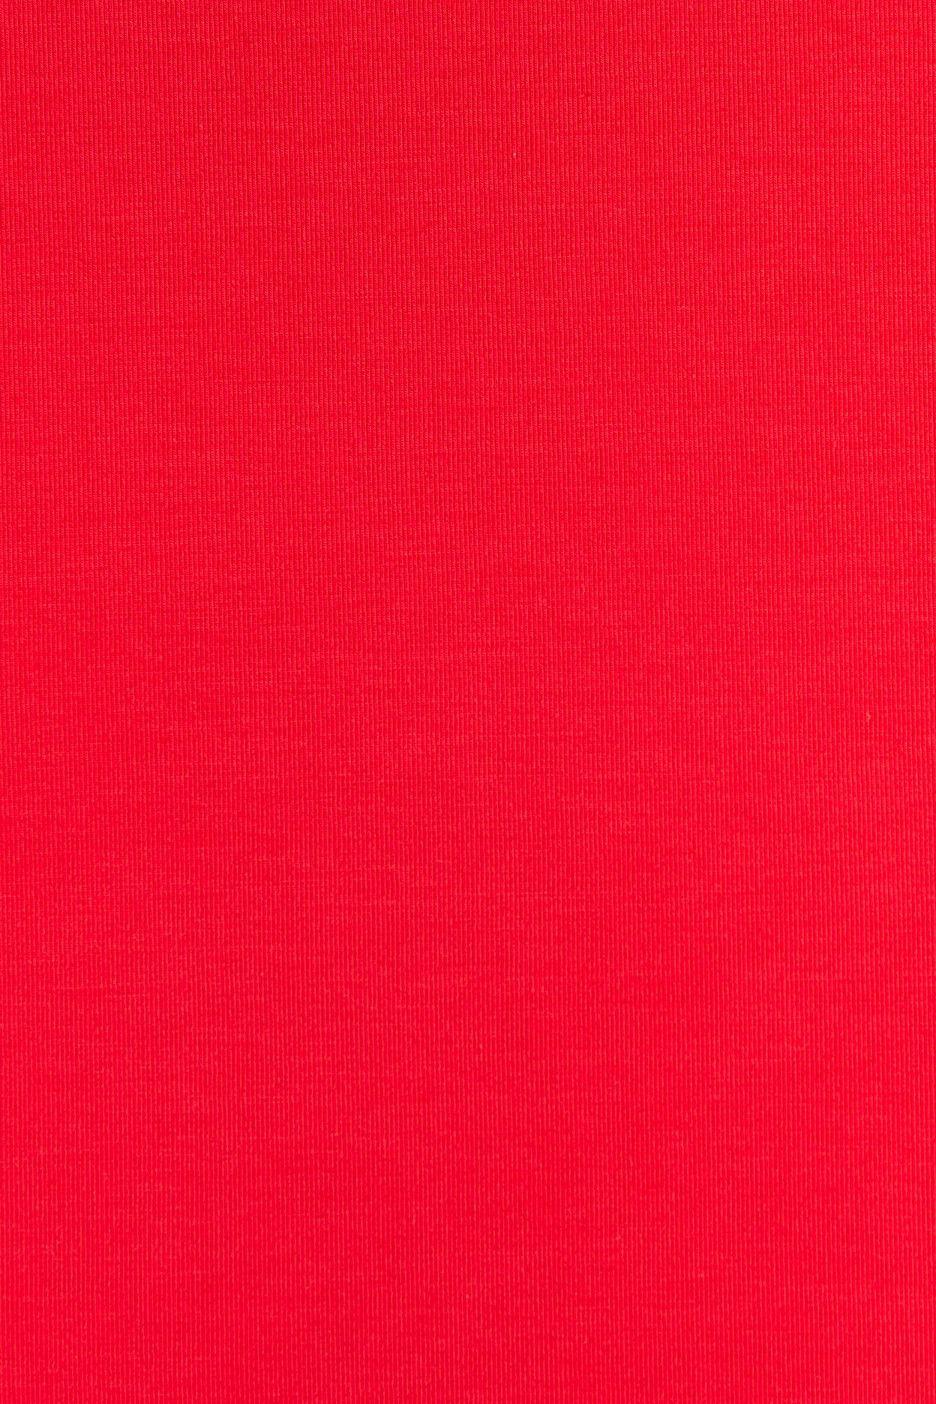 Light Red Wallpapers - Top Free Light Red Backgrounds - WallpaperAccess